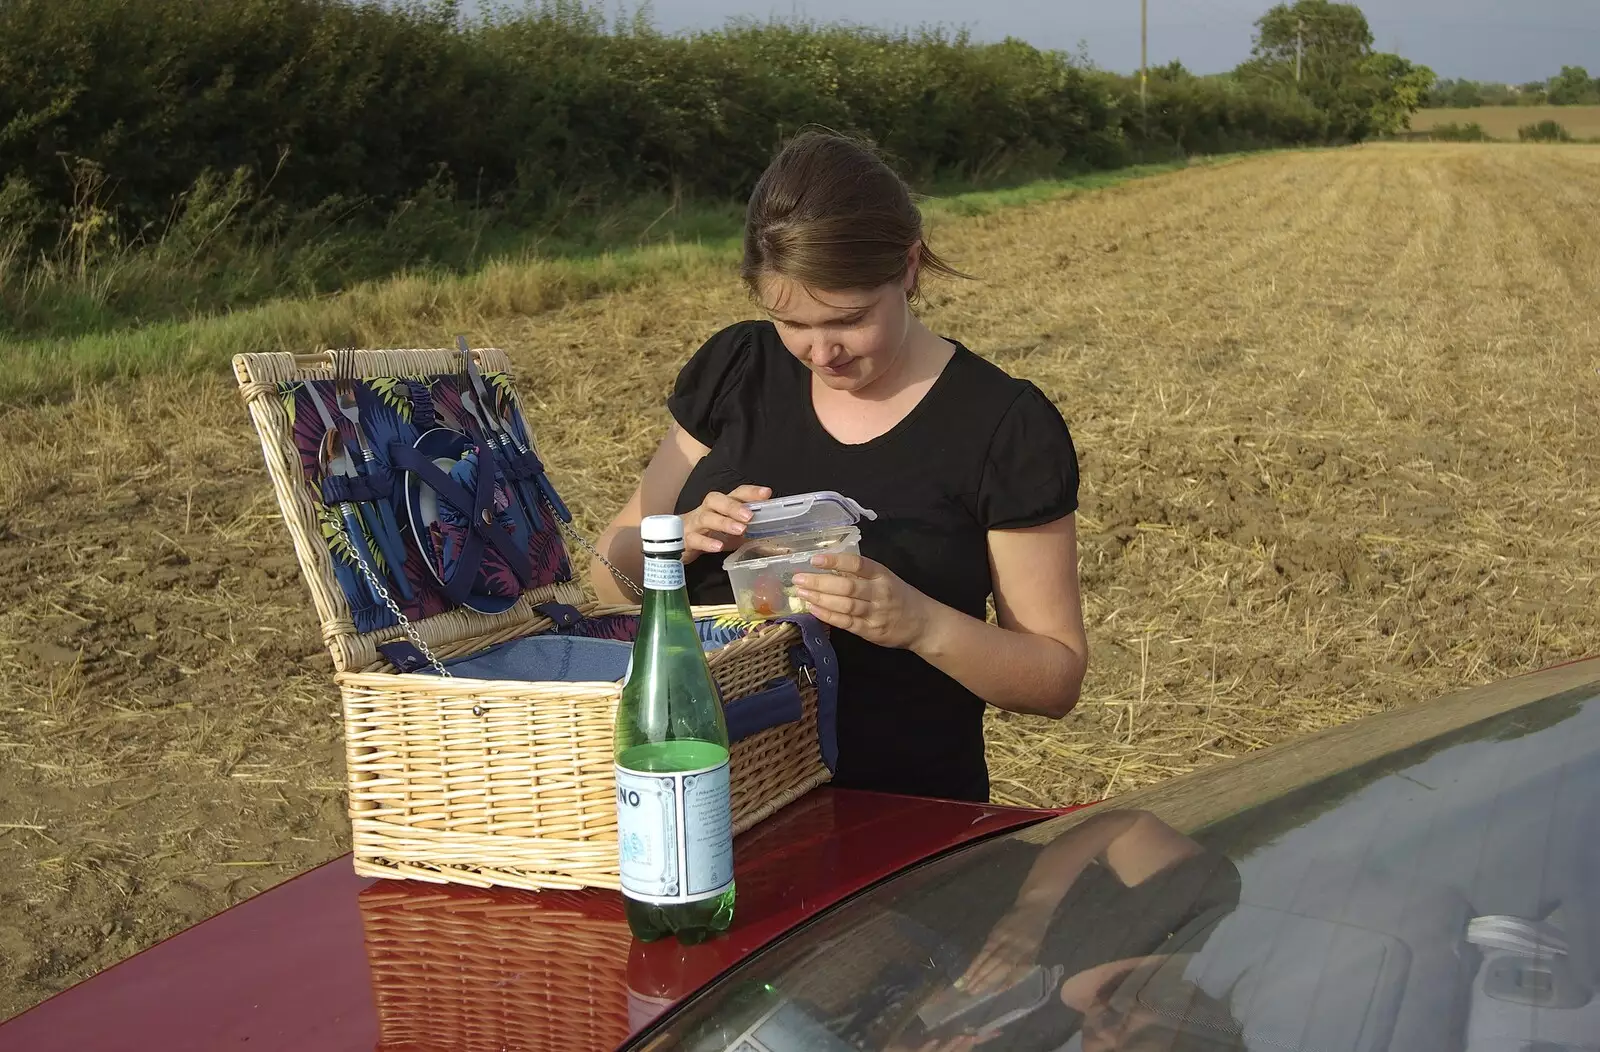 We eat a random picnic on the boot of the car, from Sam and Daisy at The Cherry Tree, and Sis and Matt Visit, Suffolk - 14th September 2008